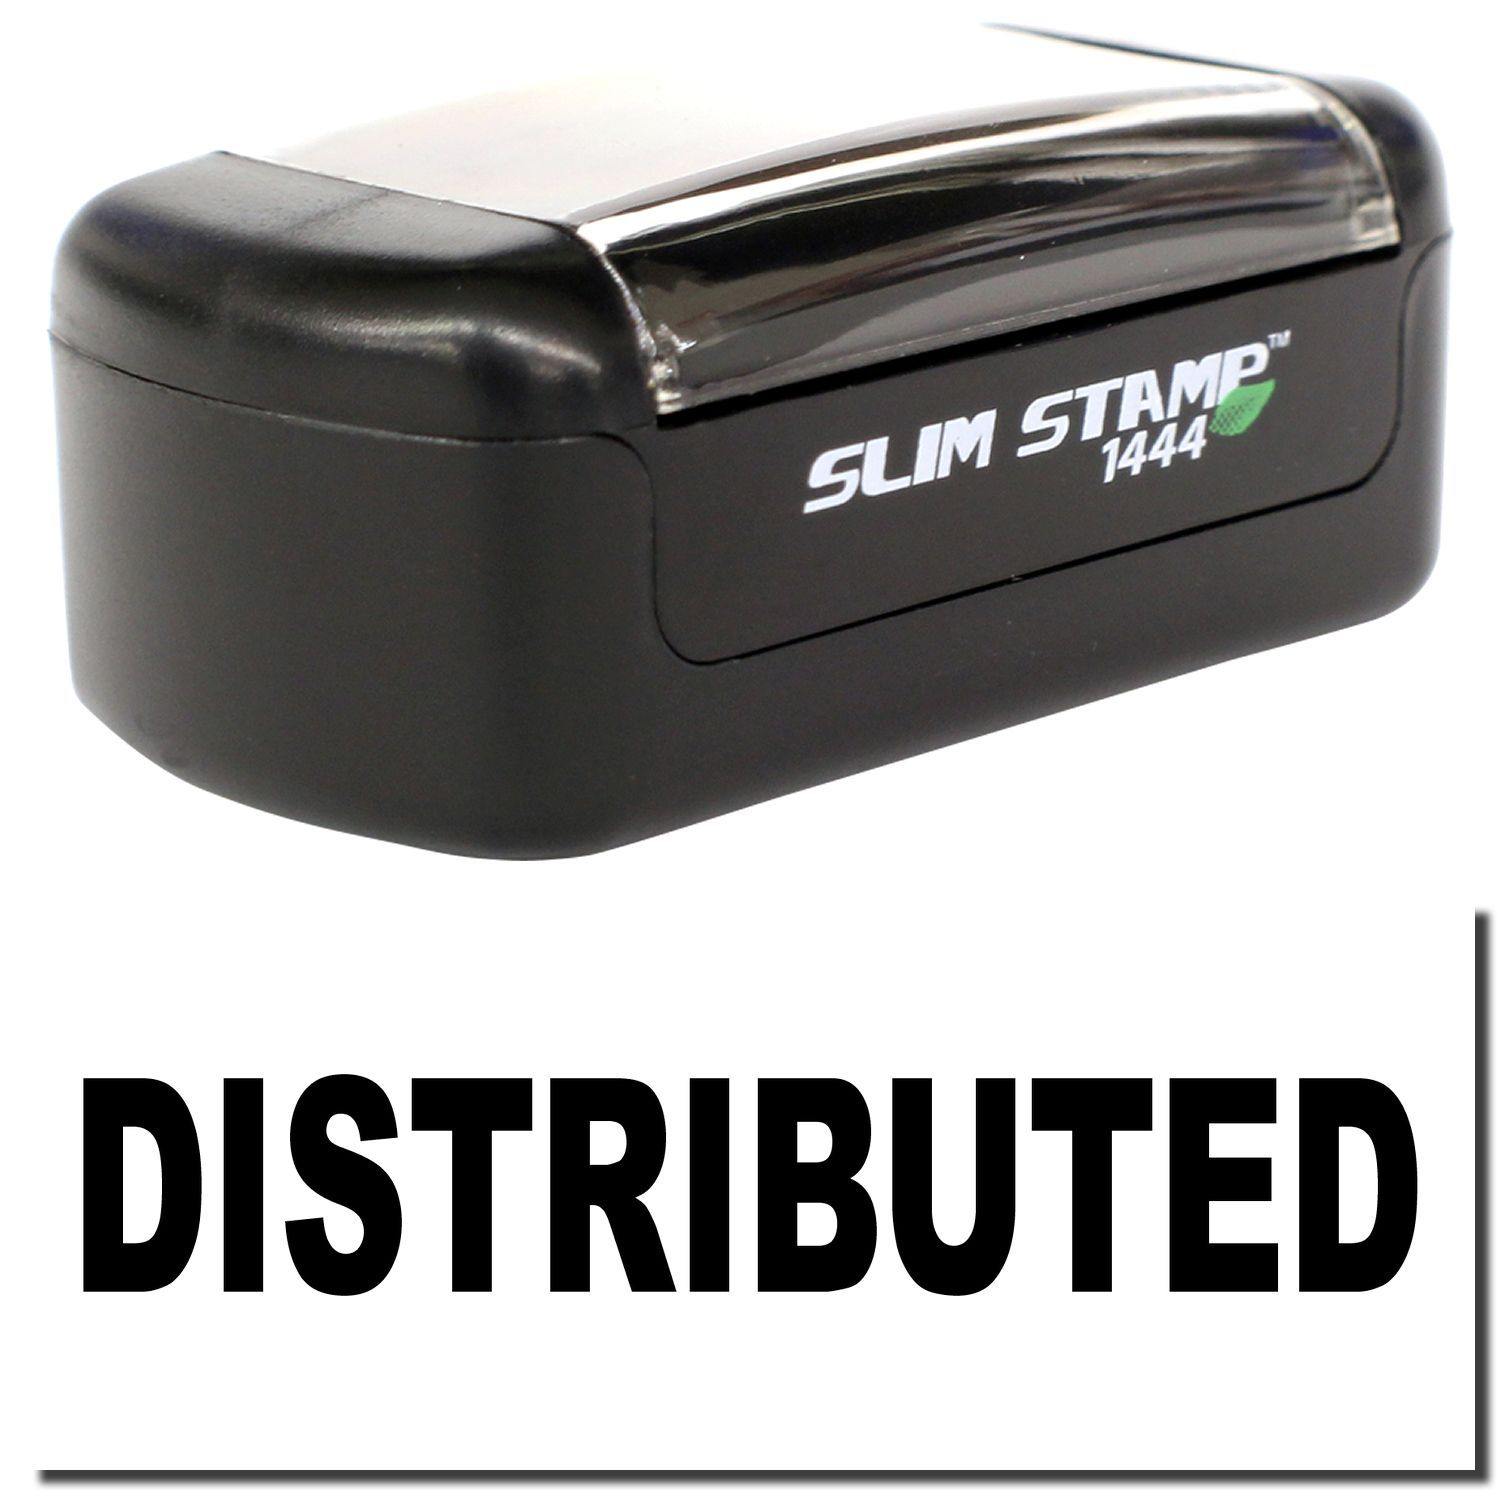 A stock office pre-inked stamp with a stamped image showing how the text "DISTRIBUTED" is displayed after stamping.